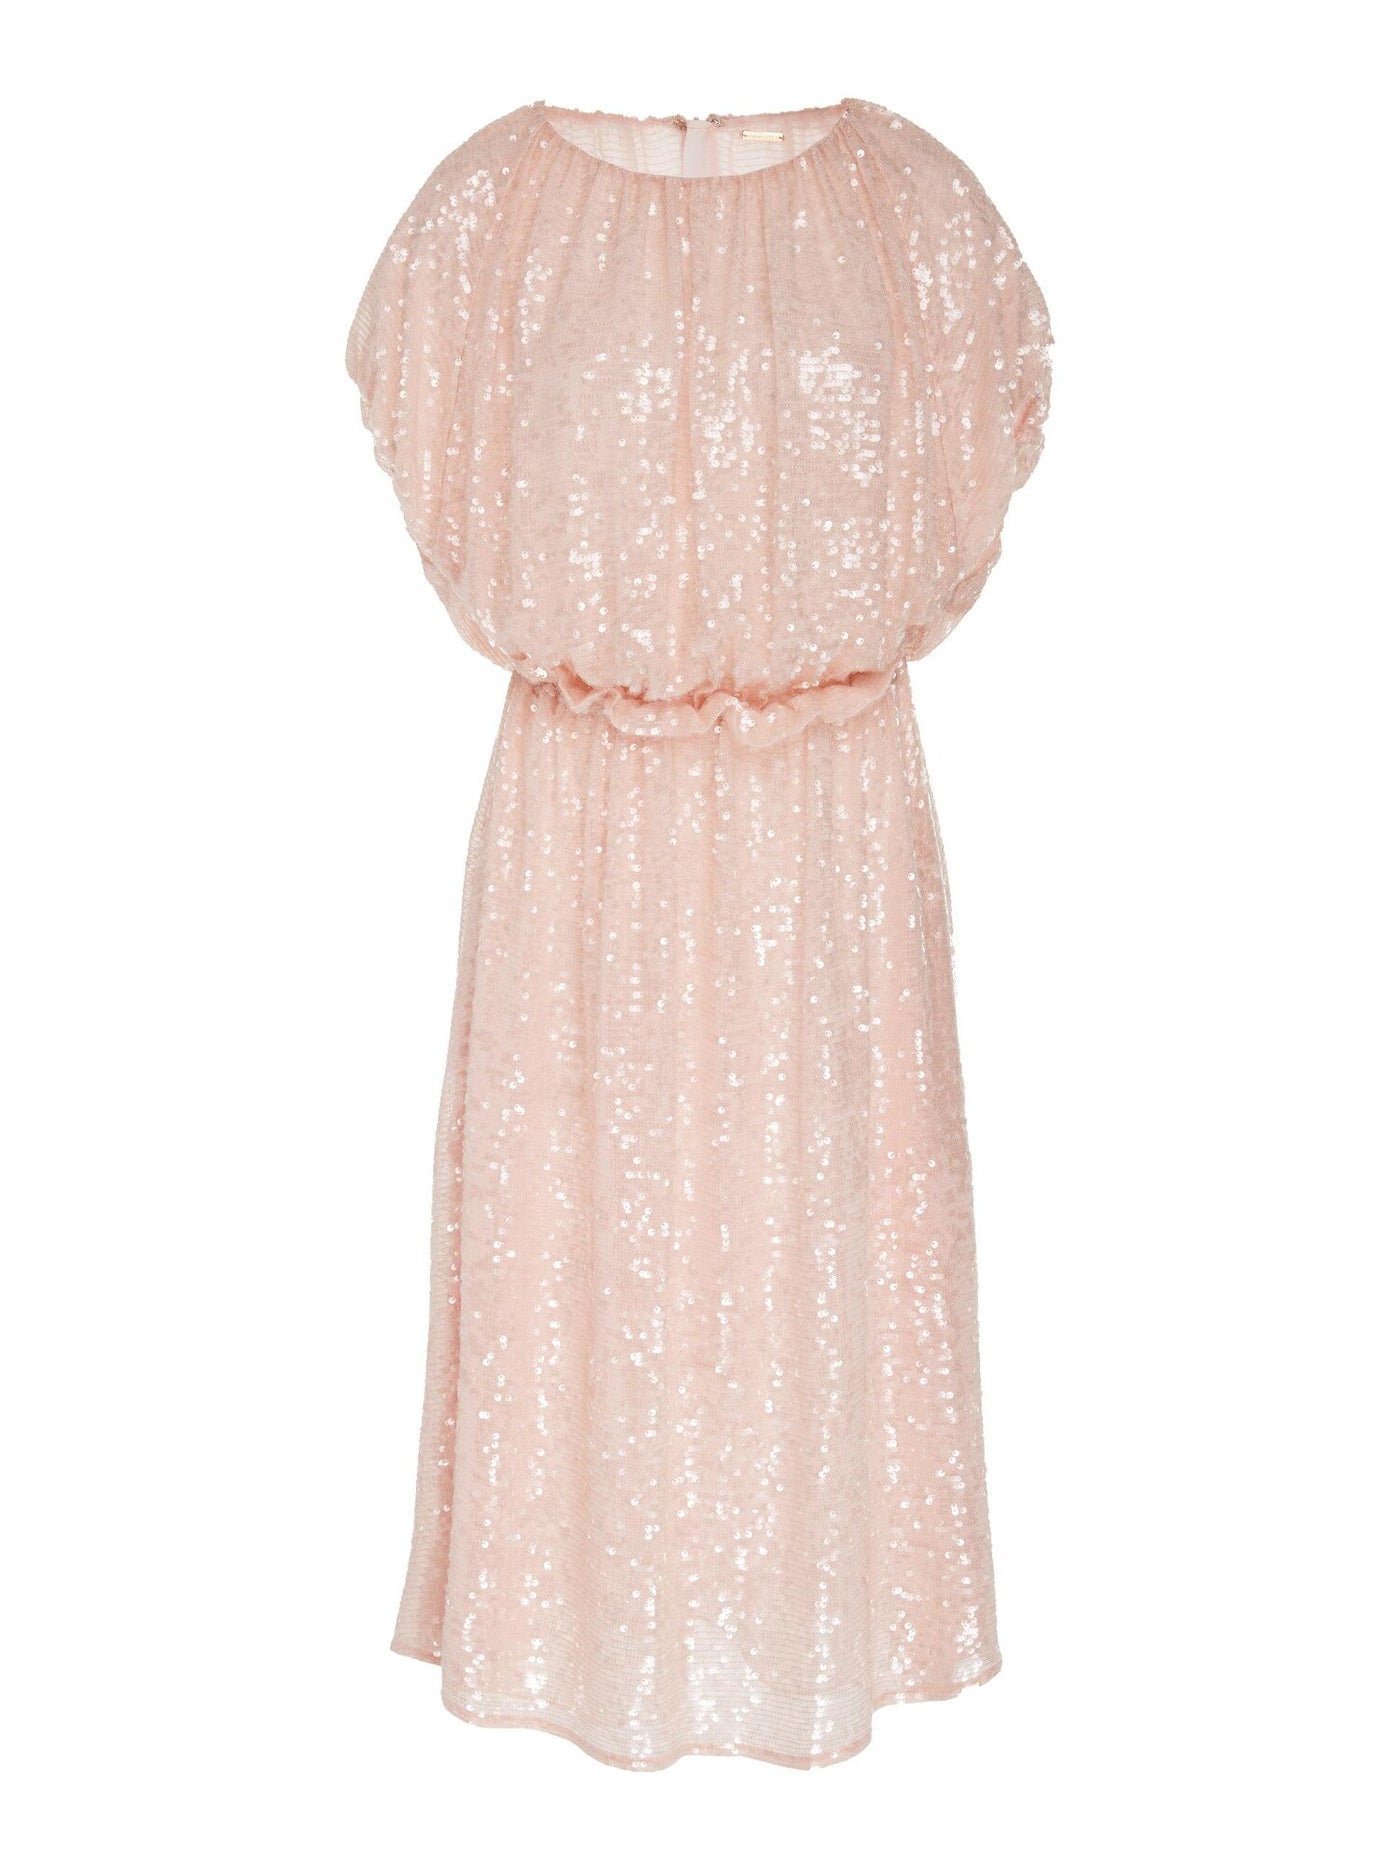 Adam Lippes Womens Pink Sequined Sleeveless Jewel Neck Below The Knee Cocktail Fit + Flare Dress 0